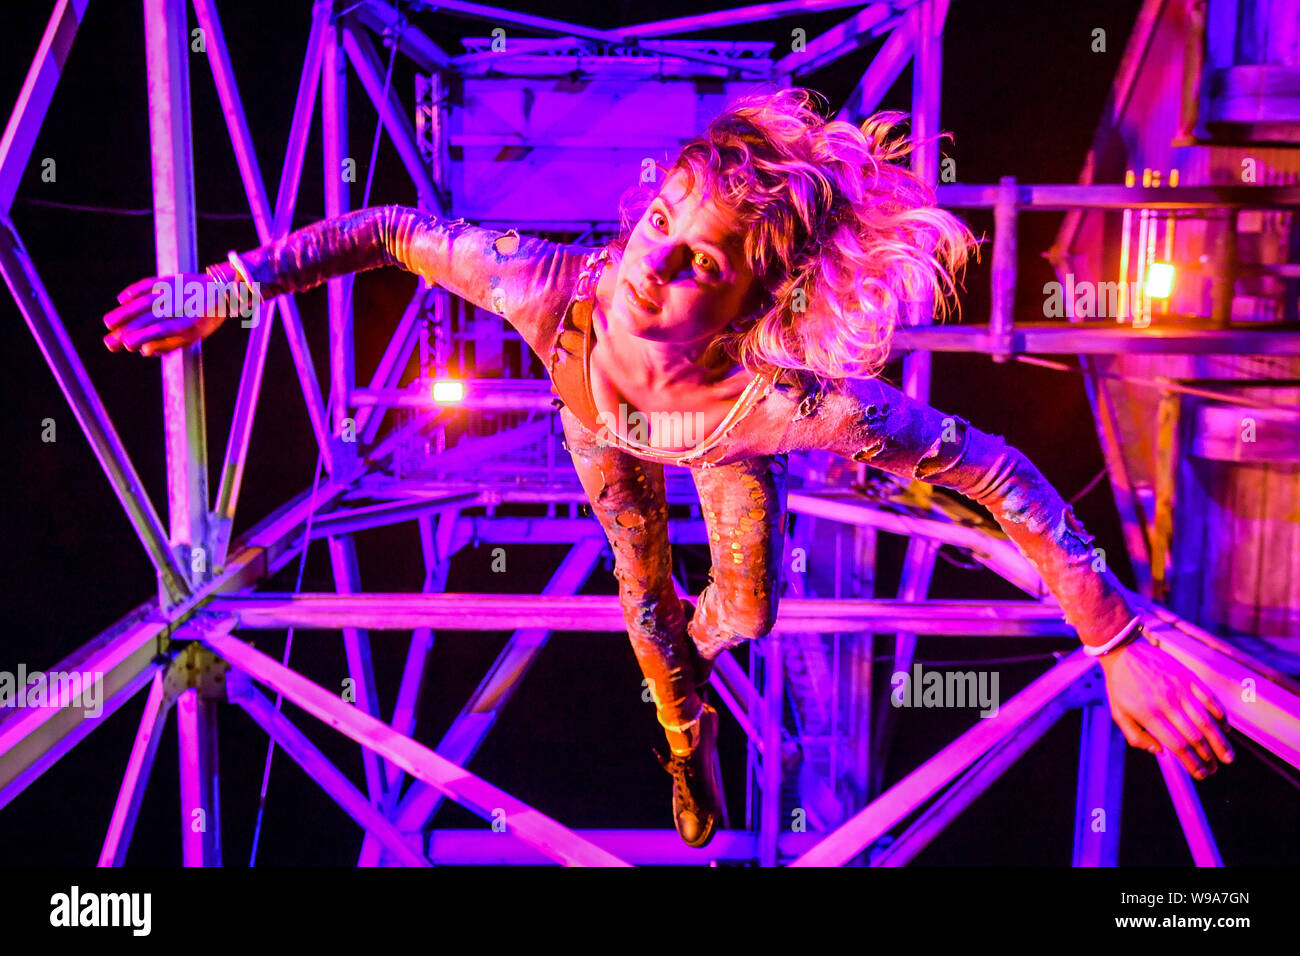 Aerial performer Rachel Fox hangs in the air from a mining pit headframe during the theatrical performance of Estah???s Story, which is set in the old mine workings at Heartlands World Heritage Site, Cornwall, featuring aerial performances, song and spoken word, retelling stories from the Cornish mining industry in the 1800s. Stock Photo